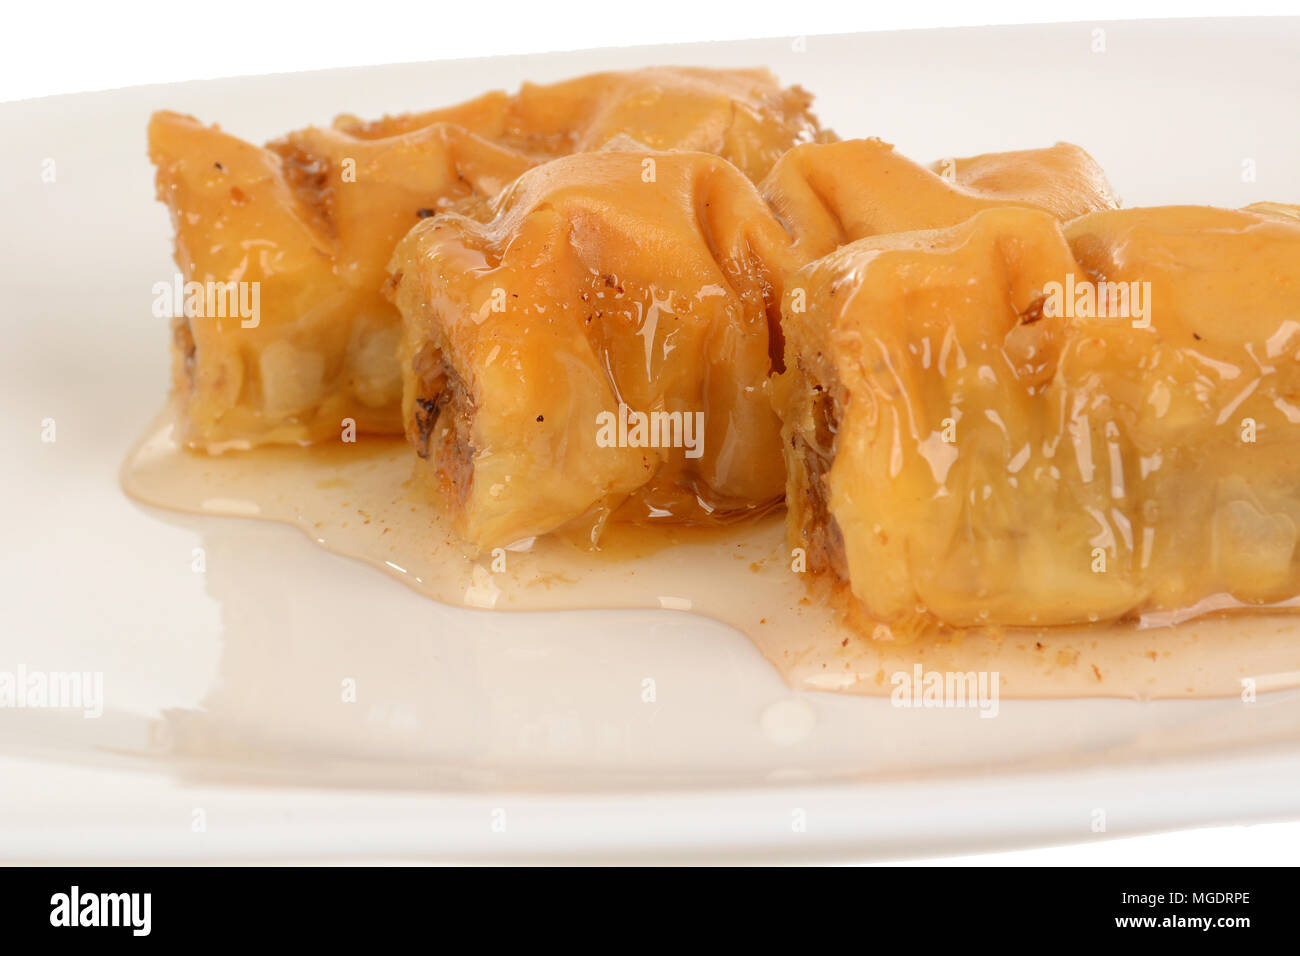 Three pieces of sweet dessert roll baklava in sugary syrup, isolated on white background Stock Photo